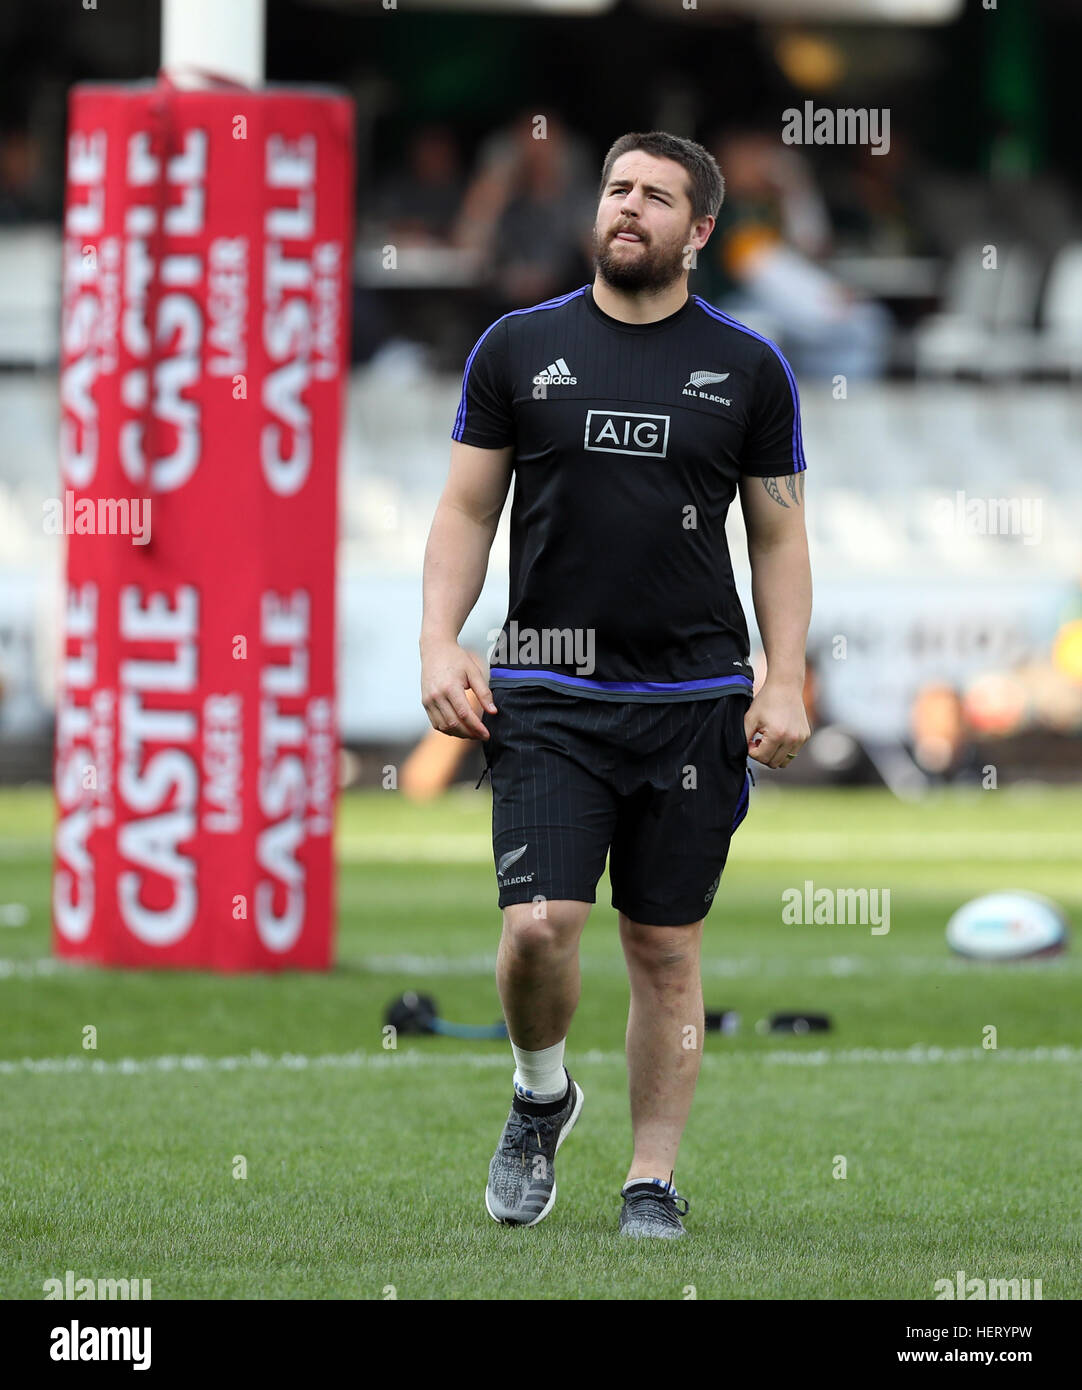 DURBAN, SOUTH AFRICA - OCTOBER 08: Dane Coles of New Zealand during the The Rugby Championship match between South Africa and New Zealand at Growthpoi Stock Photo